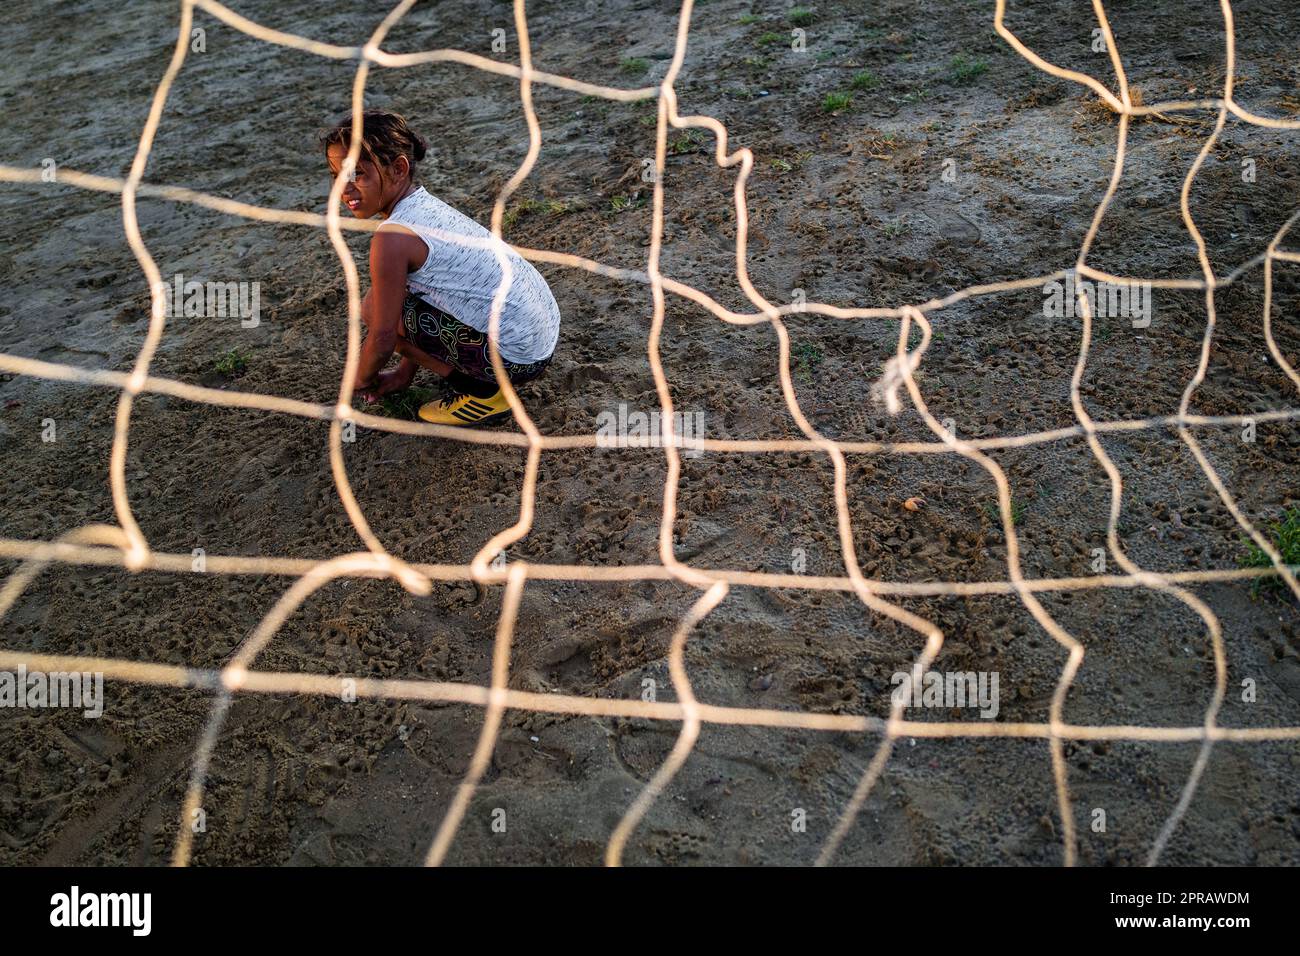 A young Colombian female football player sits inside the goal during a training session on a dirt playing field in Necoclí, Antioquia, Colombia. Stock Photo